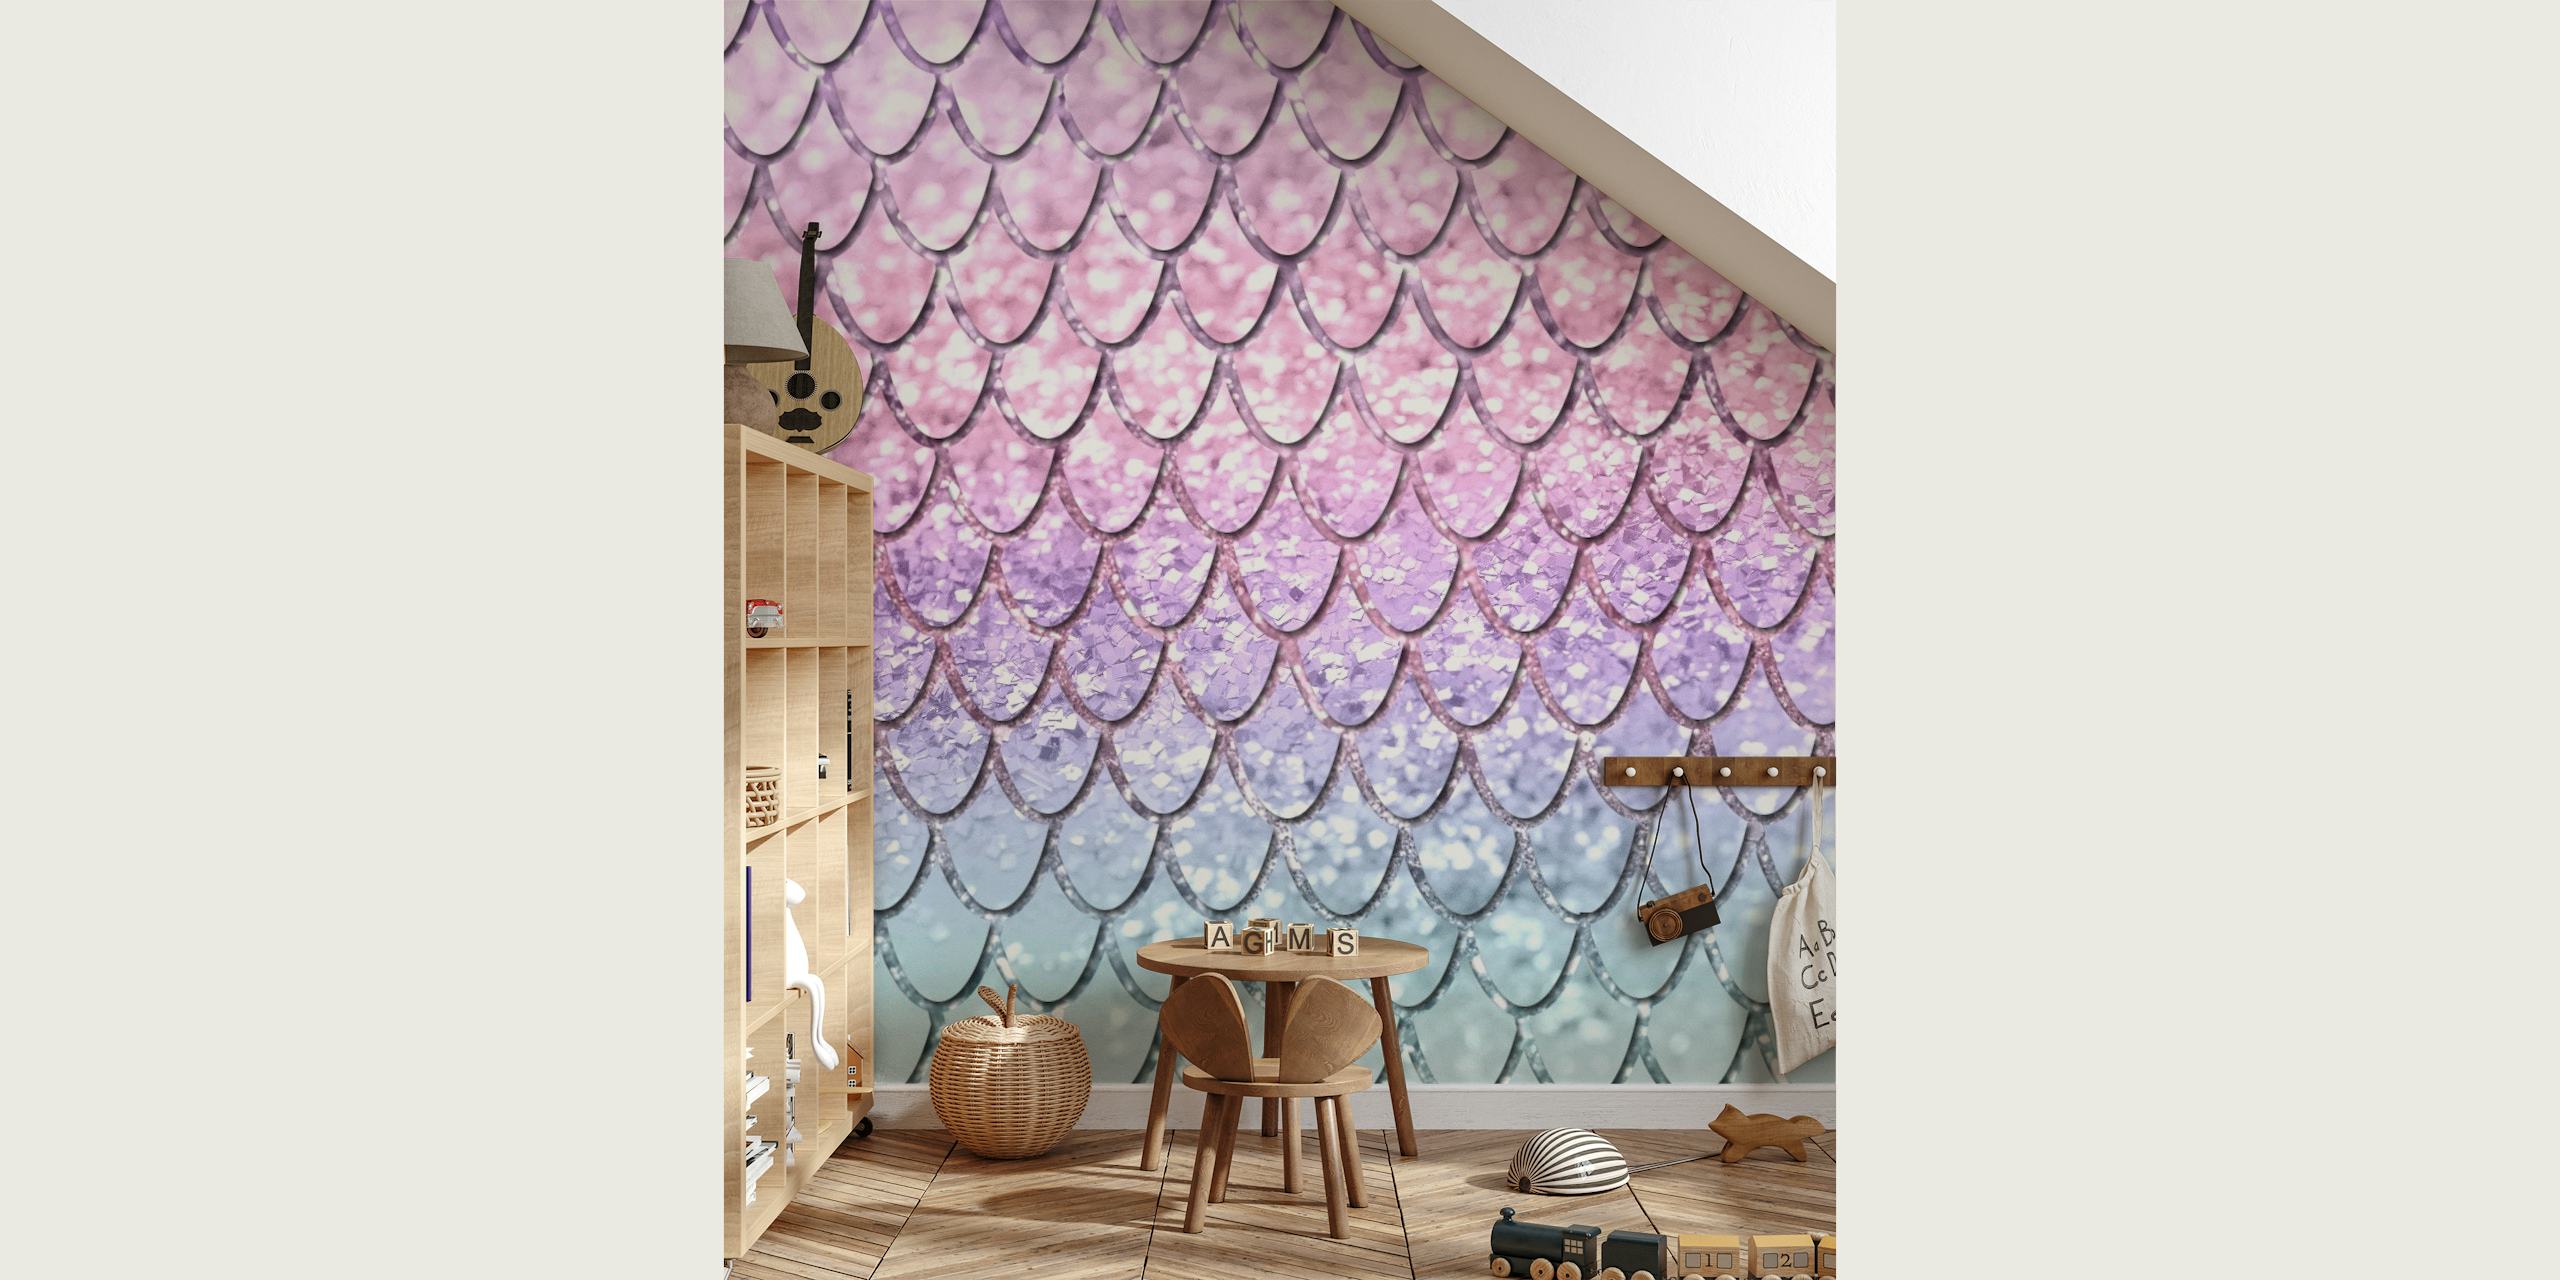 Mermaid Scales Glitter wall mural with pastel pink, blue, and purple hues.